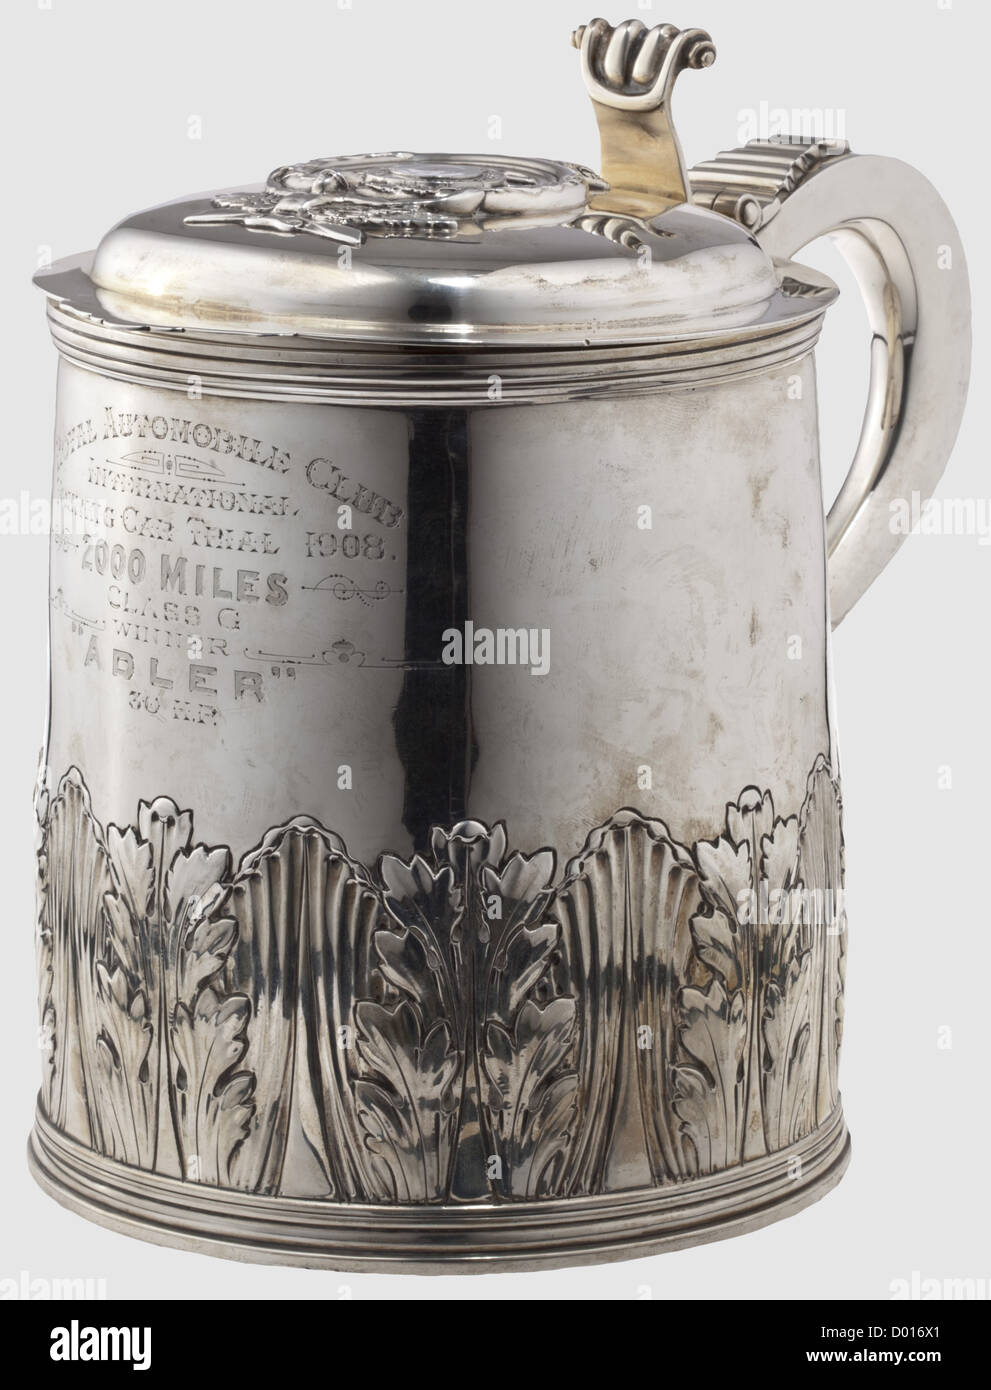 A racing prize in the form of a silver tankard,England,dated 1908. Chased silver with a dedication engraved on the front 'Royal Automobile Club- International Touring Car Trial 1908. 2000 Miles - Class G,Winner 'Adler' 30 H.P.' The sides bear English hallmarks and the master's mark 'E & Co.' The emblem of the Royal Automobile Club shown on the lid in relief. Height 24.5 cm. Weight 1,875 g. Provenance: From the legacy of the German race driver,H. Wilhelm,historic,historical,1900s,20th century,vessel,vessels,object,objects,stills,clipping,clippings,Additional-Rights-Clearences-Not Available Stock Photo